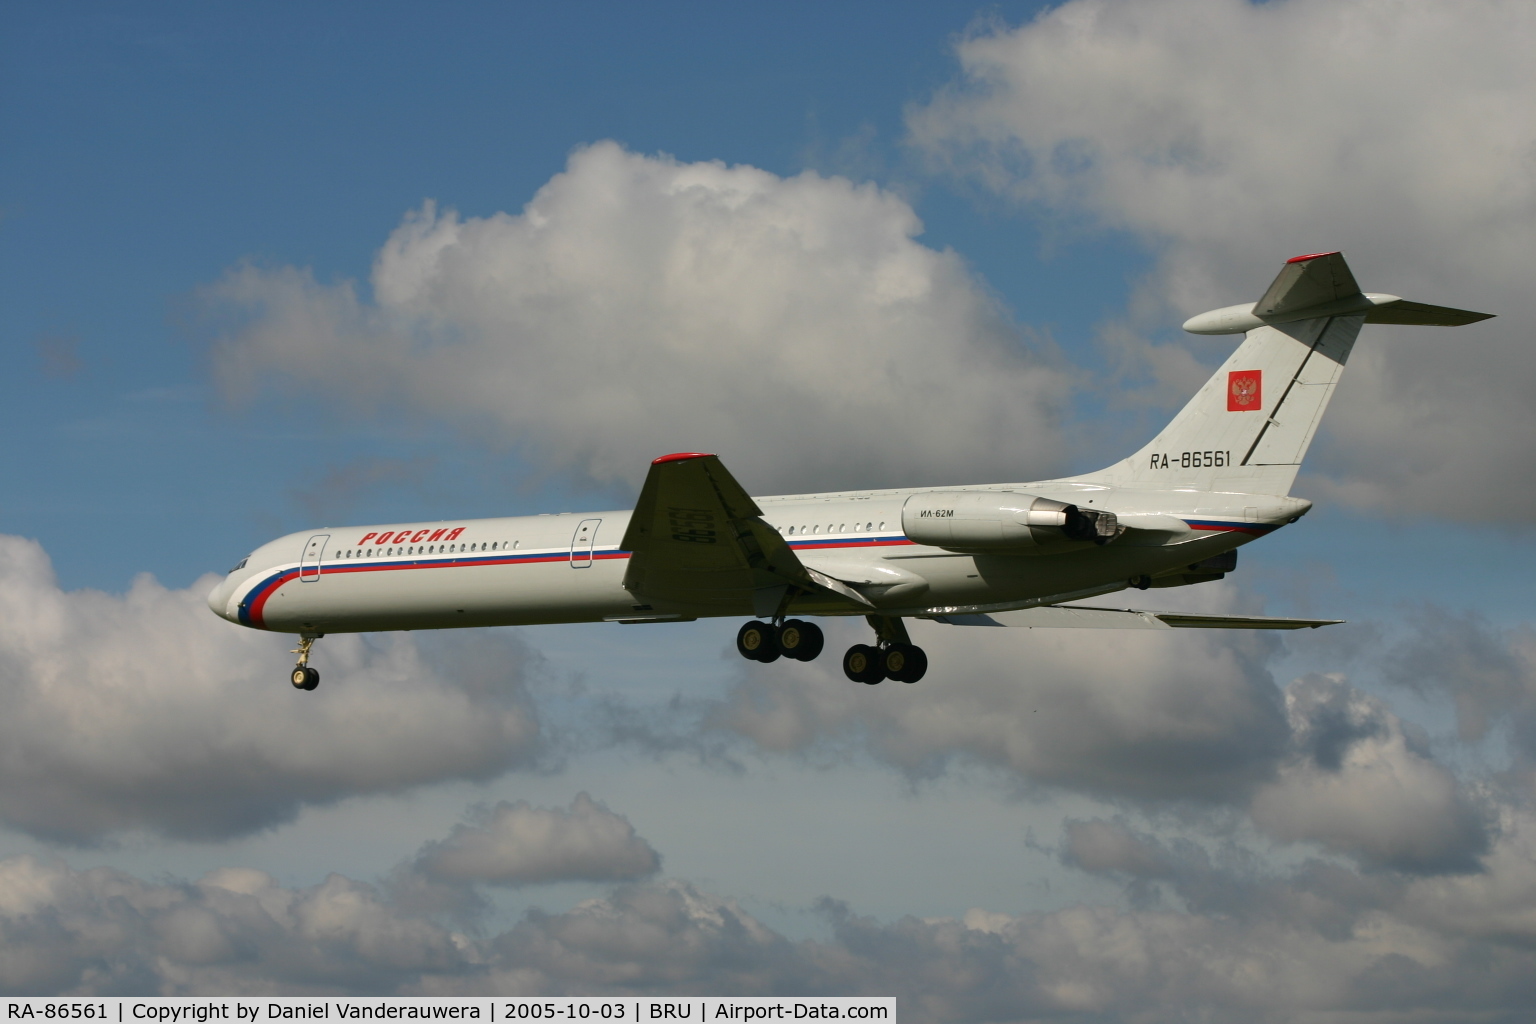 RA-86561, 1992 Ilyushin Il-62M C/N 4154842, arrival of 2nd IL-62M with russian delegation